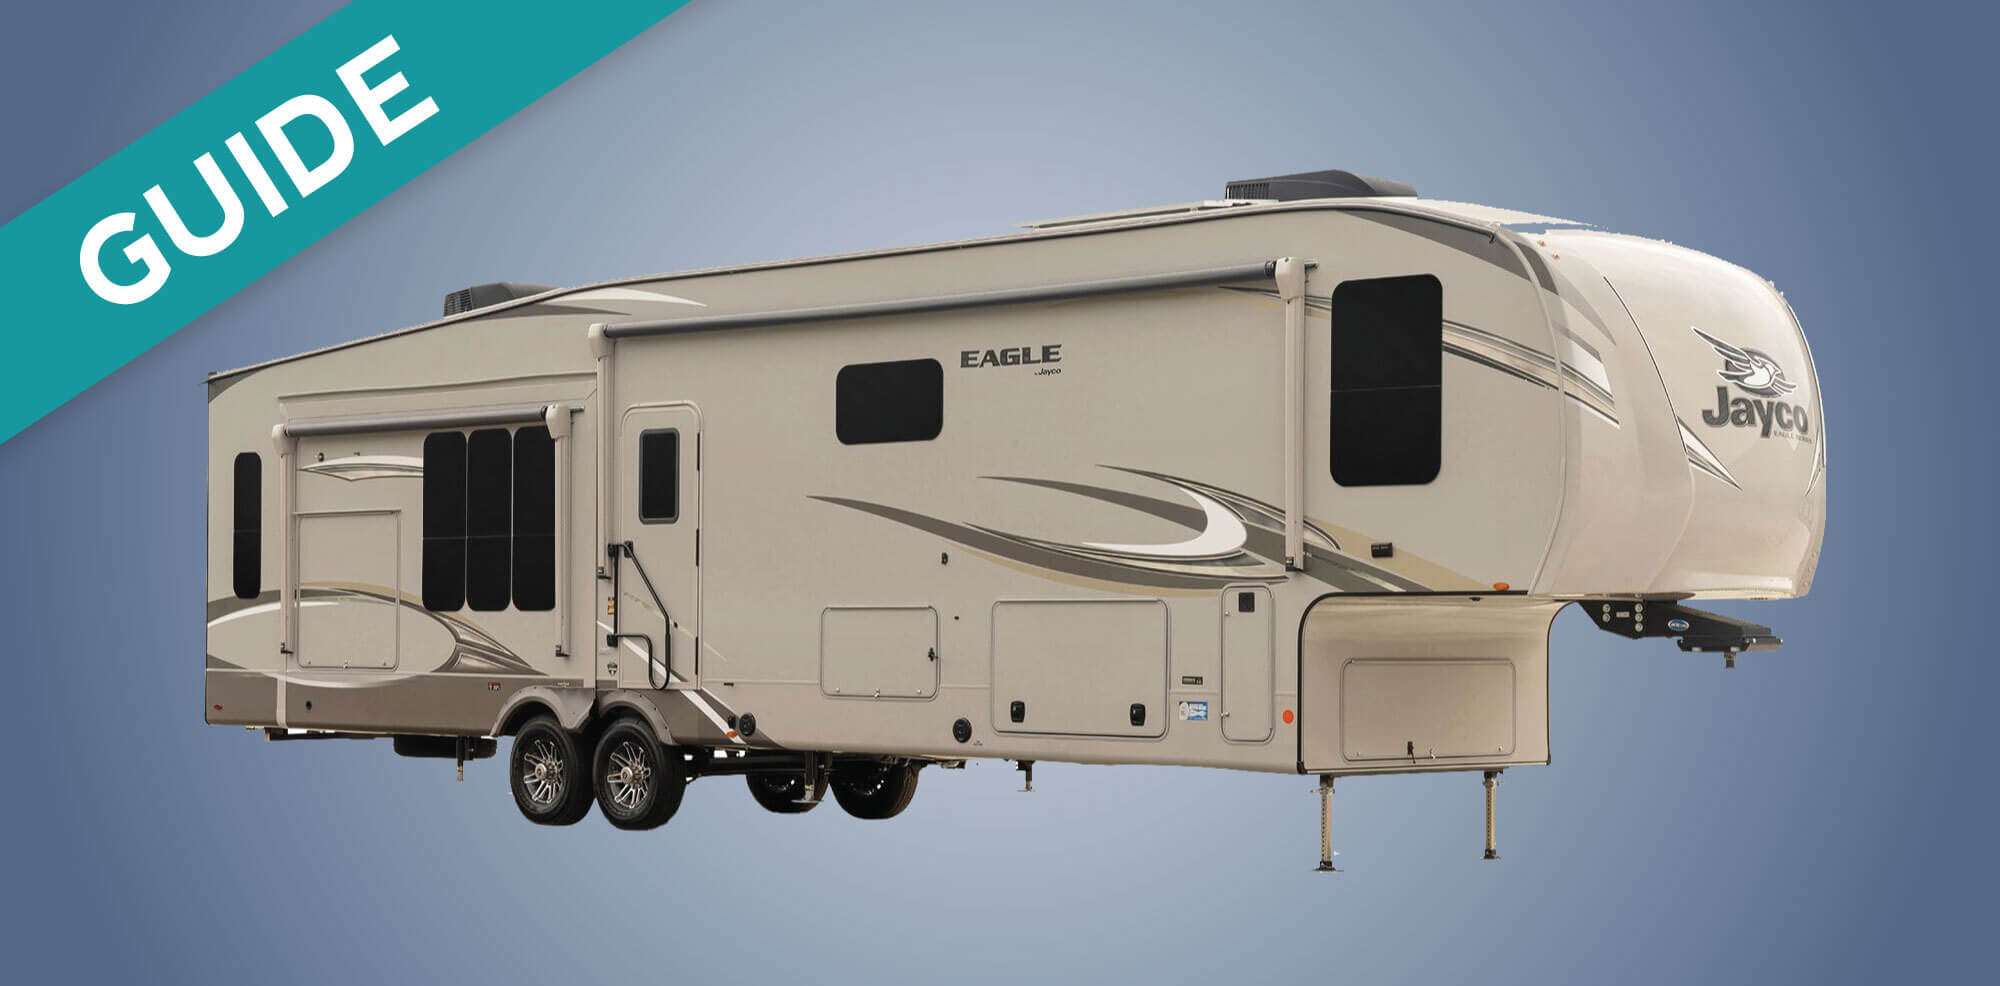 What Is A Fifth Wheel? - We explore the history, pros, cons, and cost of fifth wheels RVs. 